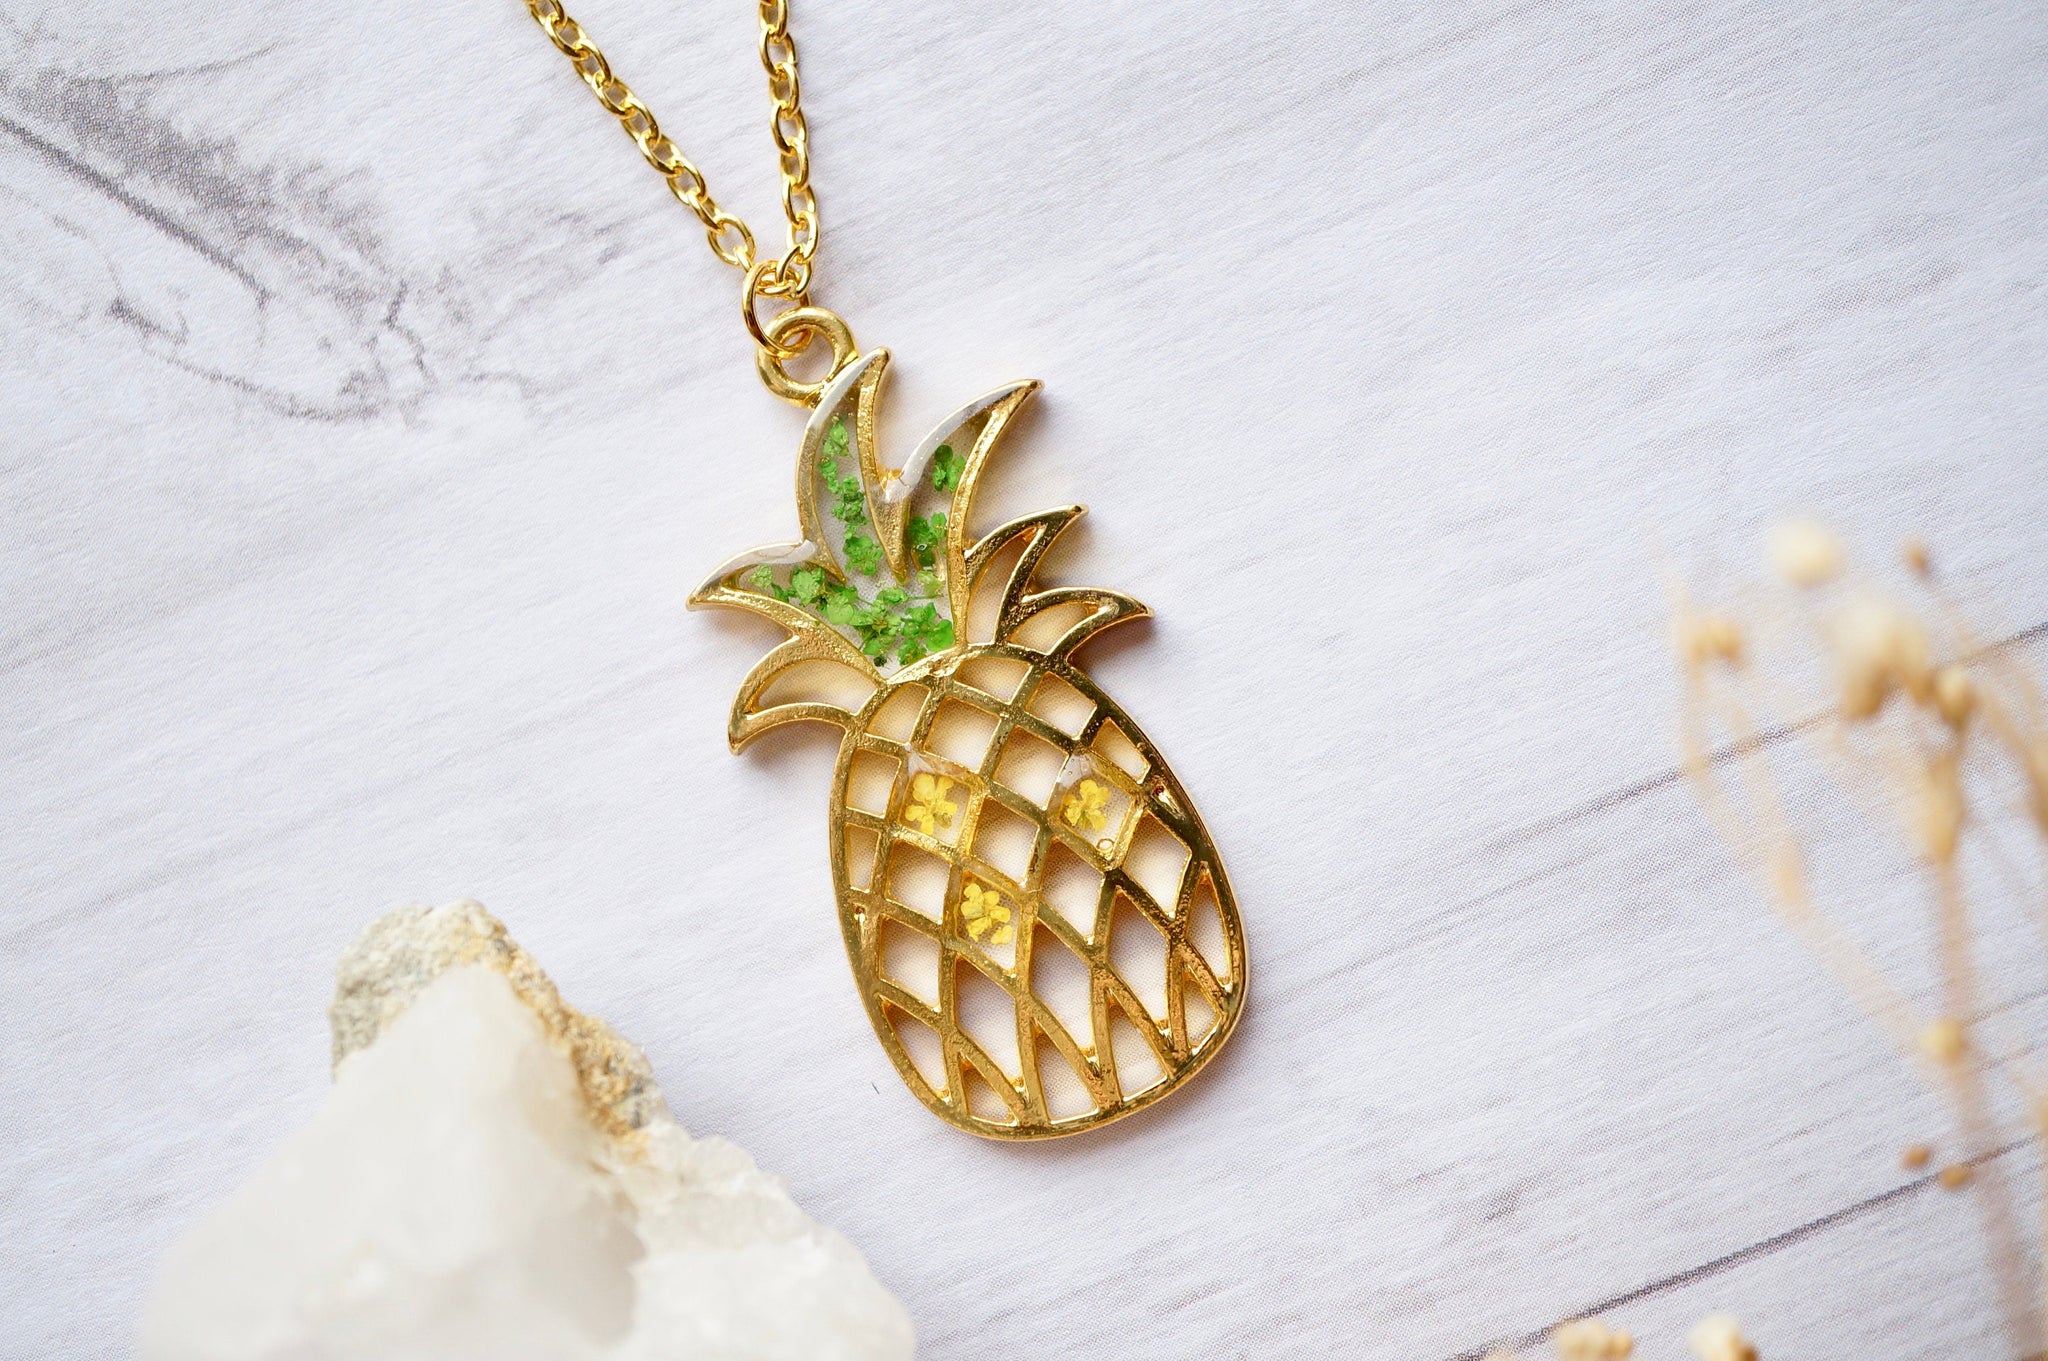 Solid Gold Pineapple Necklace by Joy Everley - From £365 GBP